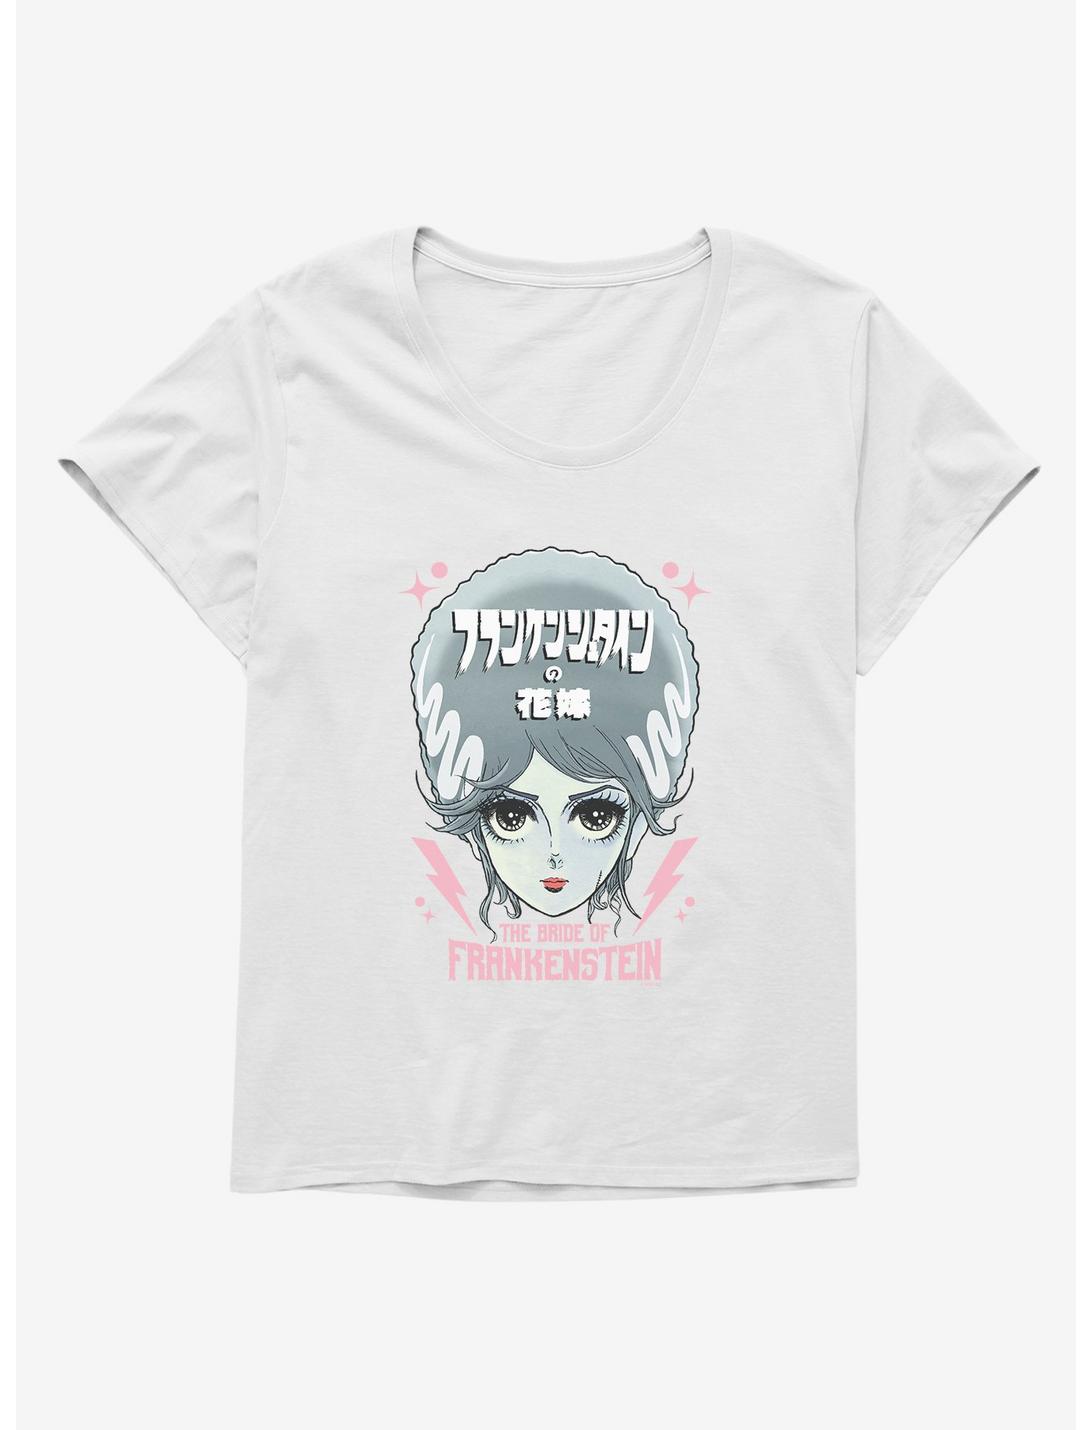 Universal Anime Monsters The Bride Of Frankenstein Portrait Womens T-Shirt Plus Size, WHITE, hi-res